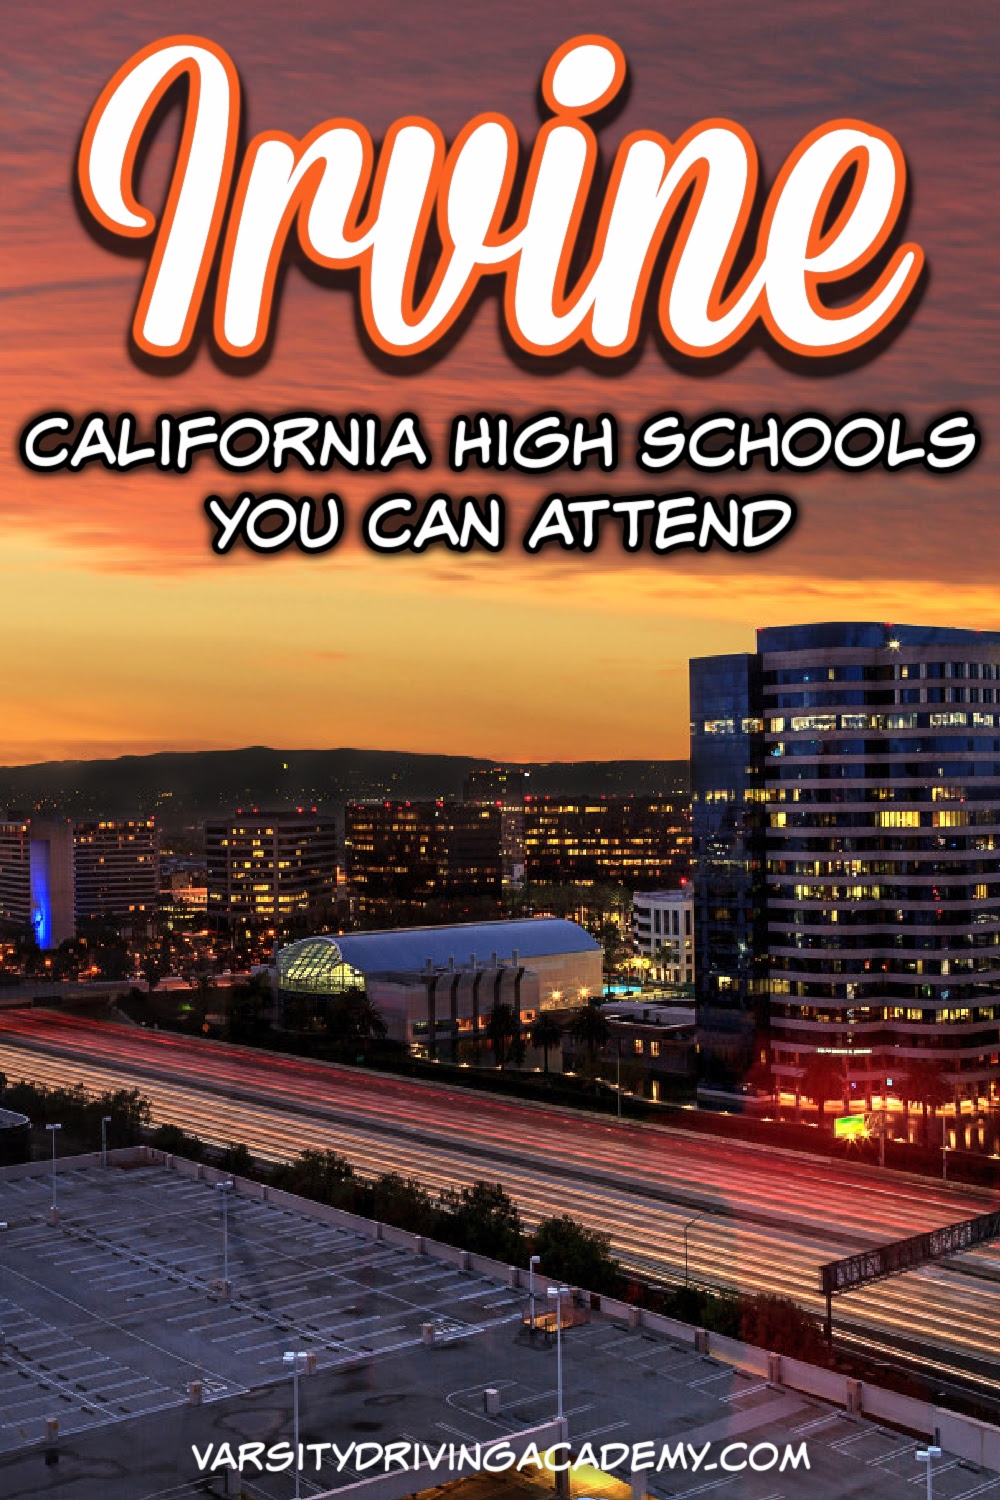 Find out which Irvine California high schools you can attend and get started with enrollment so you can experience the best in California.